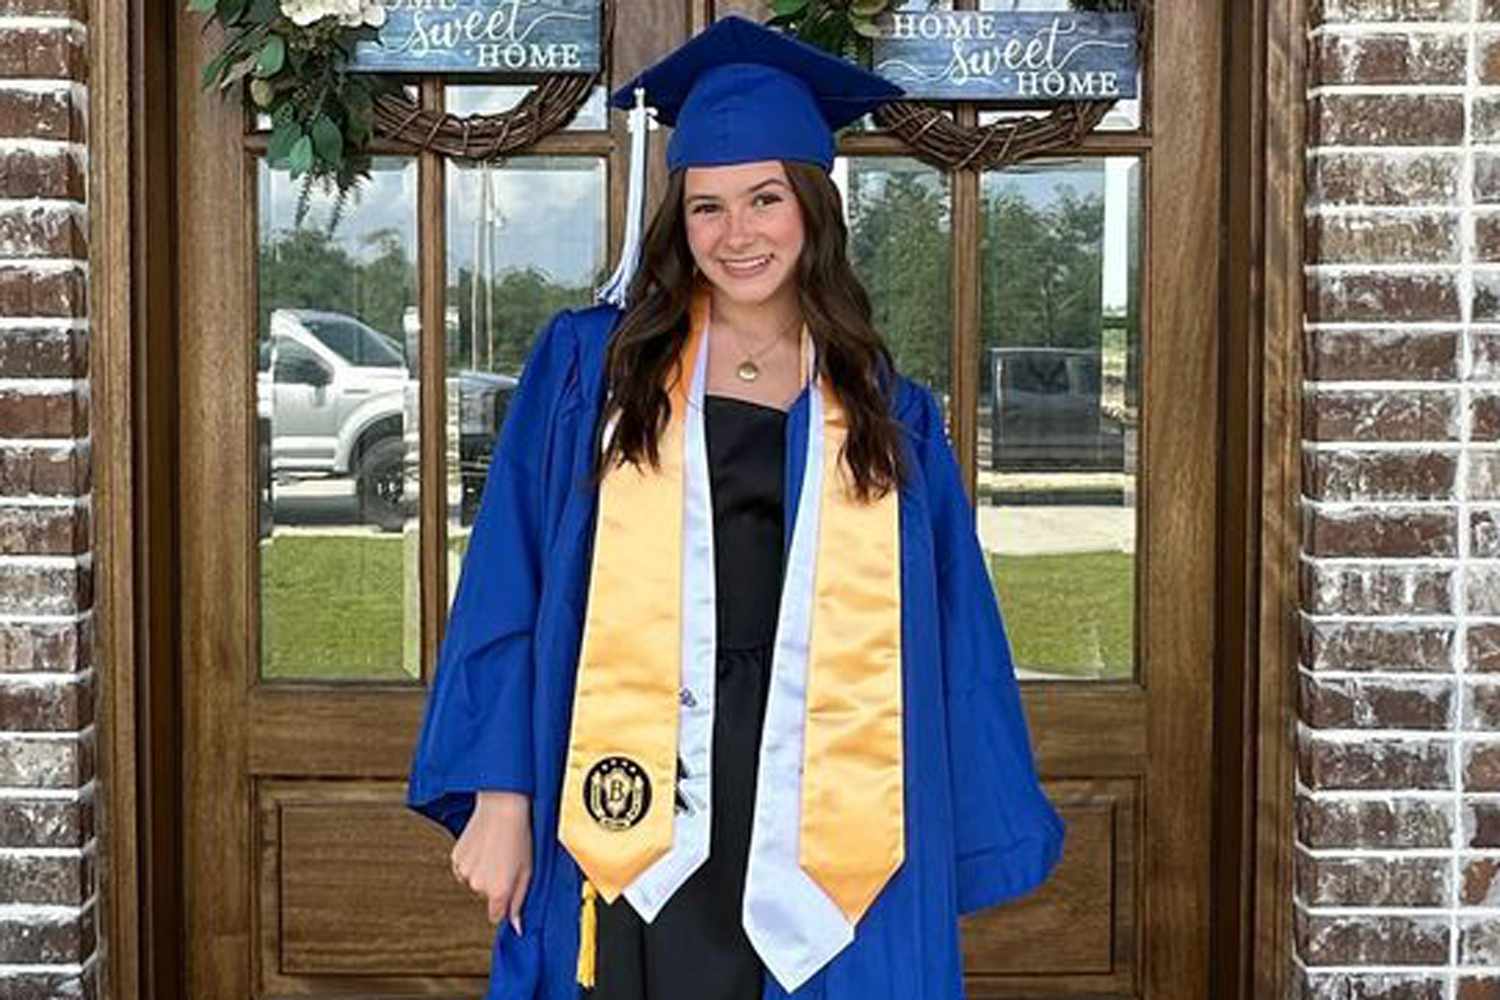 “IF” and“ Walking Dead” Star Cailey Fleming Shares Graduation Photo: ‘Bye High School’